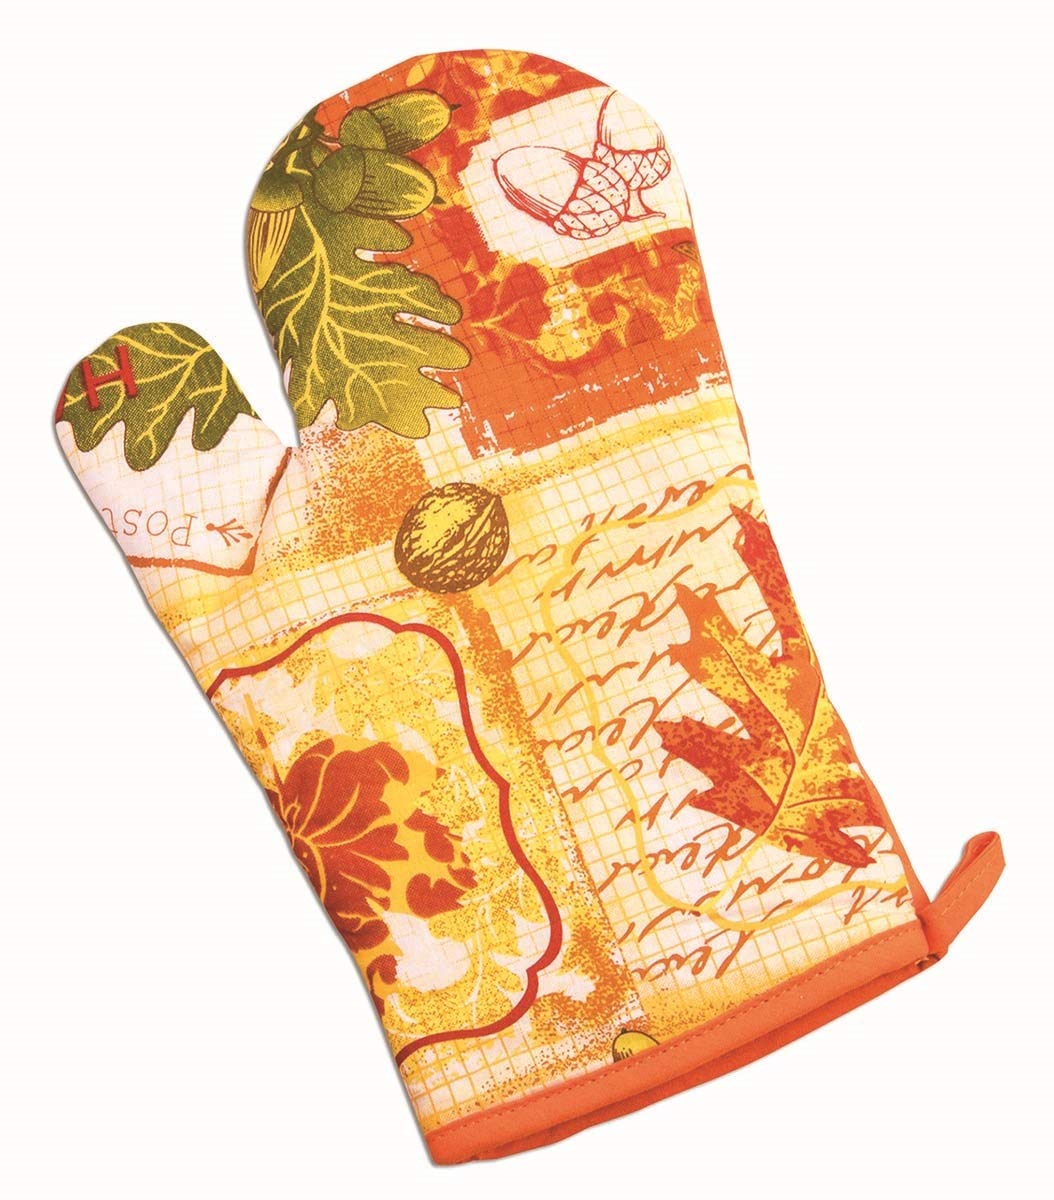 Harvest/Fall/Thanksgiving 3 Piece Set with Potholder, Oven Mitt and Kitchen Towel